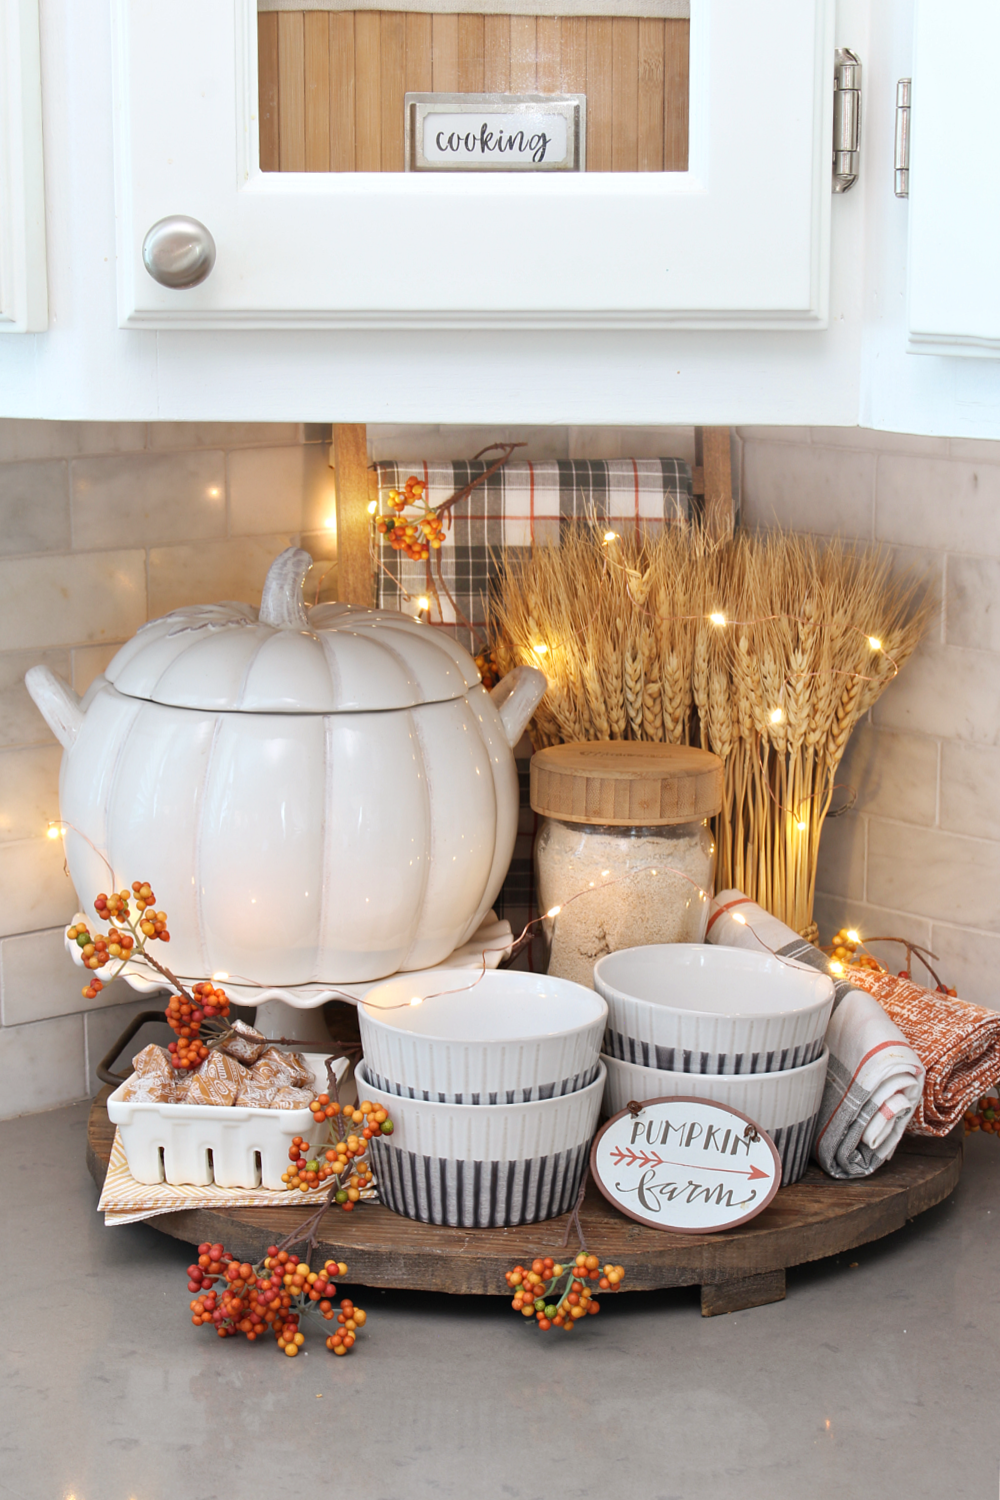 Fall vignette in a kitchen with twinkle lights.